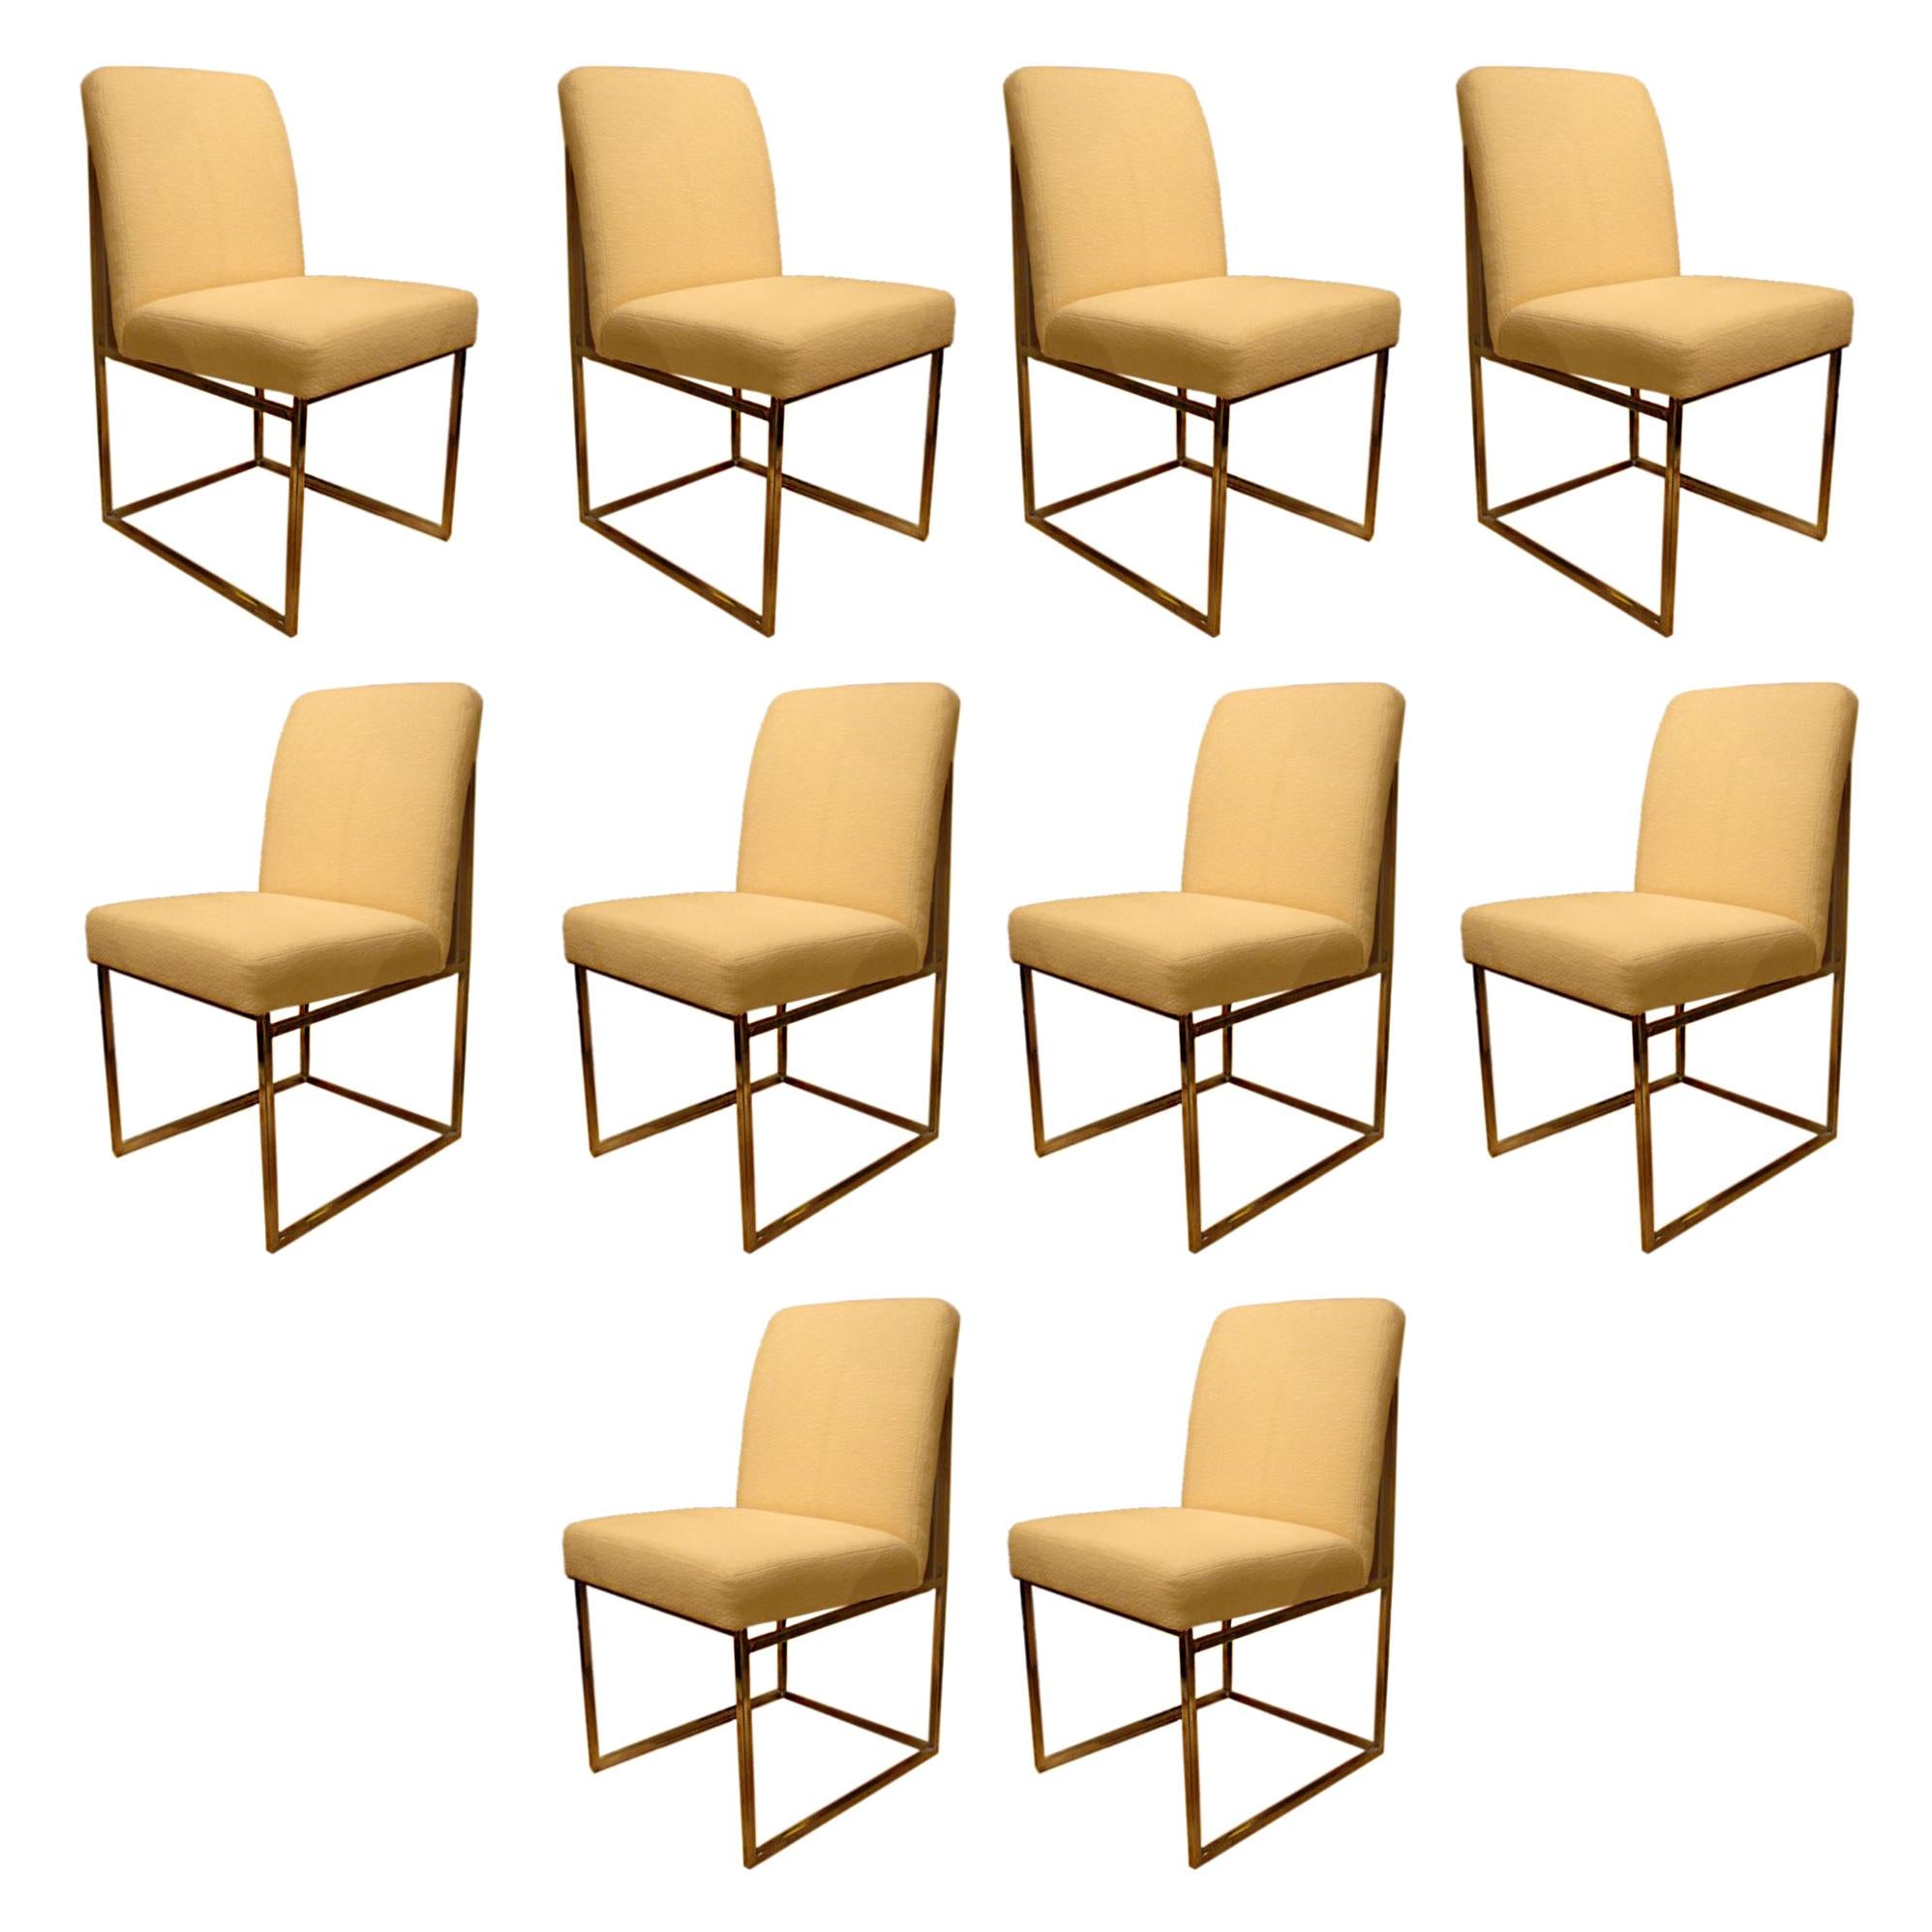 Set of Minimalist Brass Dining Chairs by DIA in COM